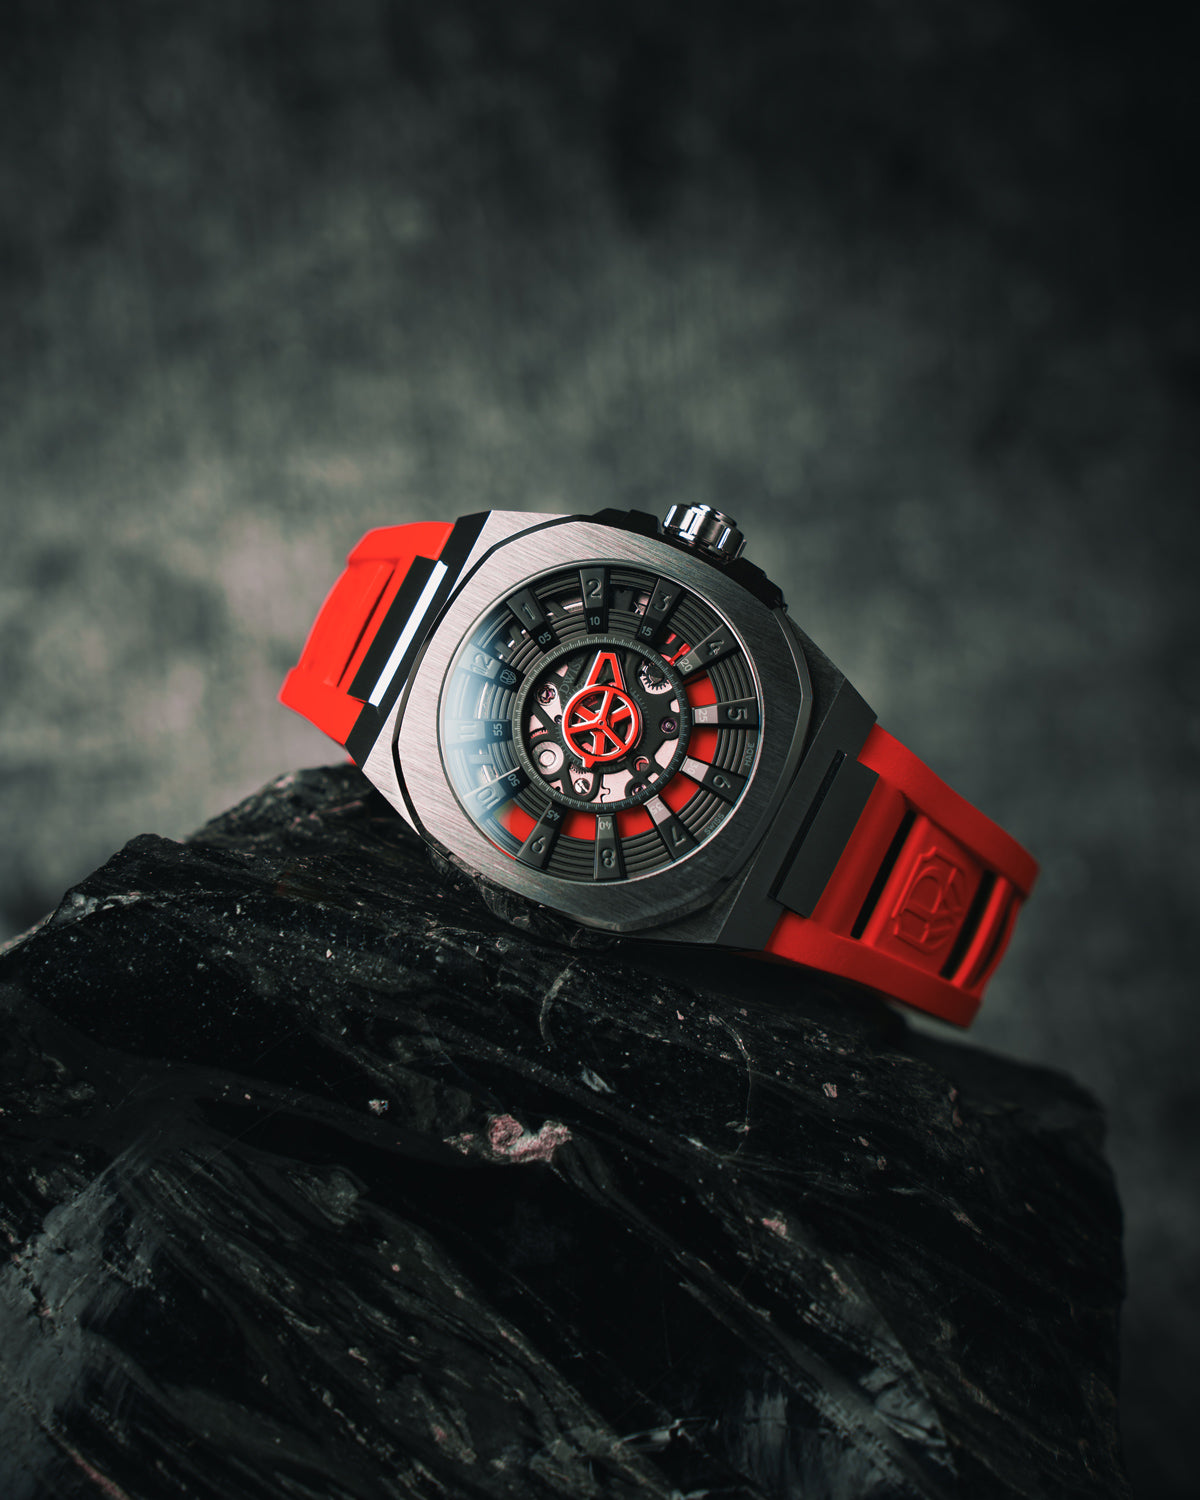 DWISS M3S red - FKM red rubber strap, swiss made design awarded watch with DWISS signature mysterious hours time display and sapphire crystal